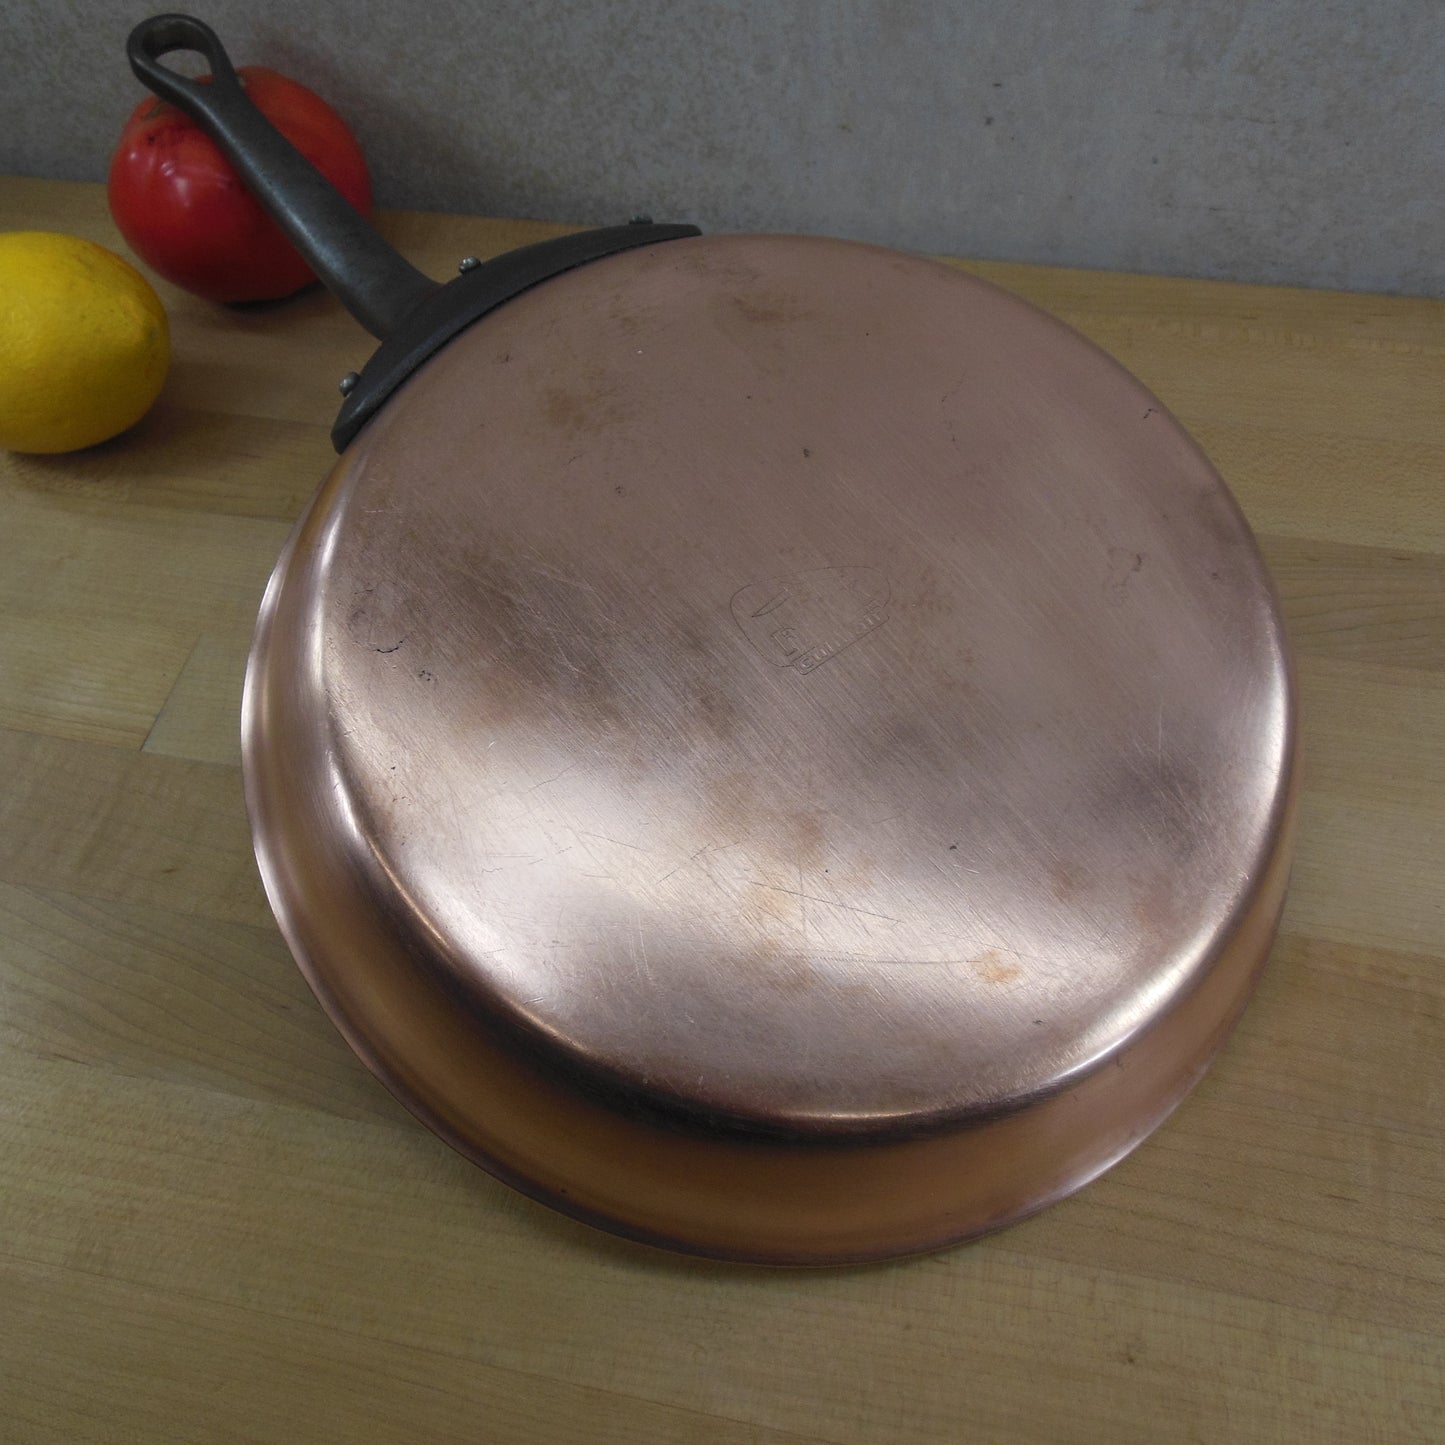 Falk Culinair Belgium 24cm Classic Copper Stainless Fry Pan 9-1/4" cleaned